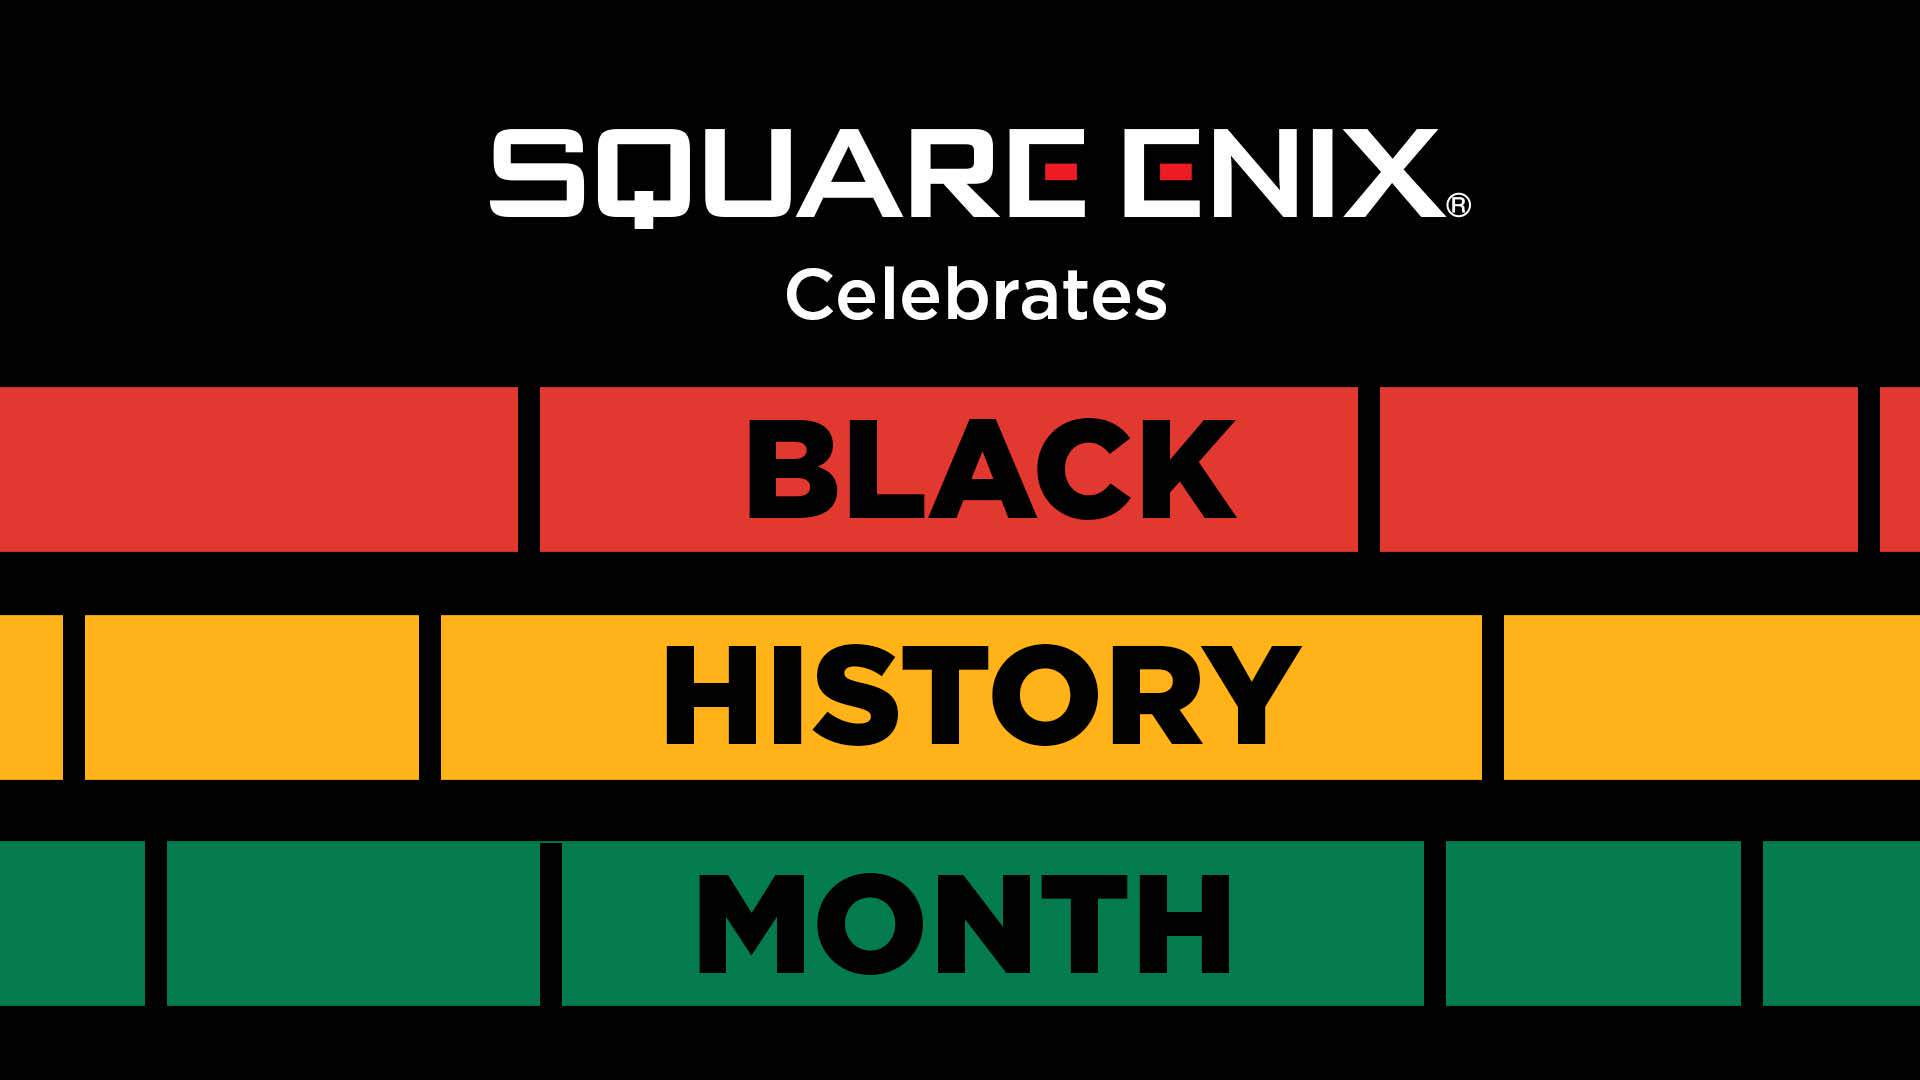 Multiple parties interested in Square Enix buyout says report